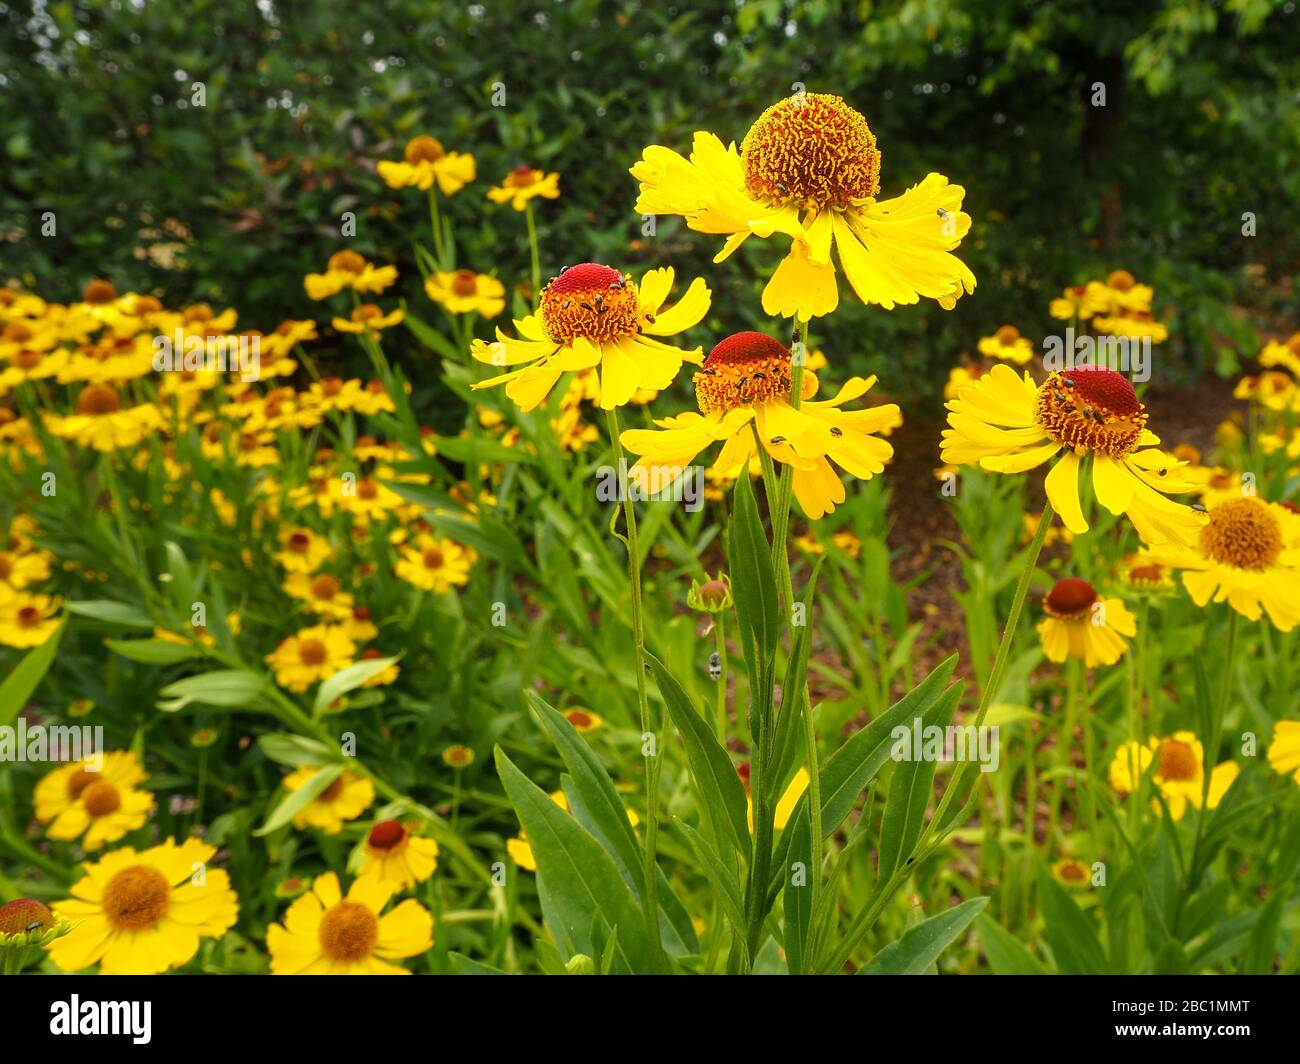 Bright yellow Helenium or sneezeweed flowers in full bloom in a summer garden Stock Photo